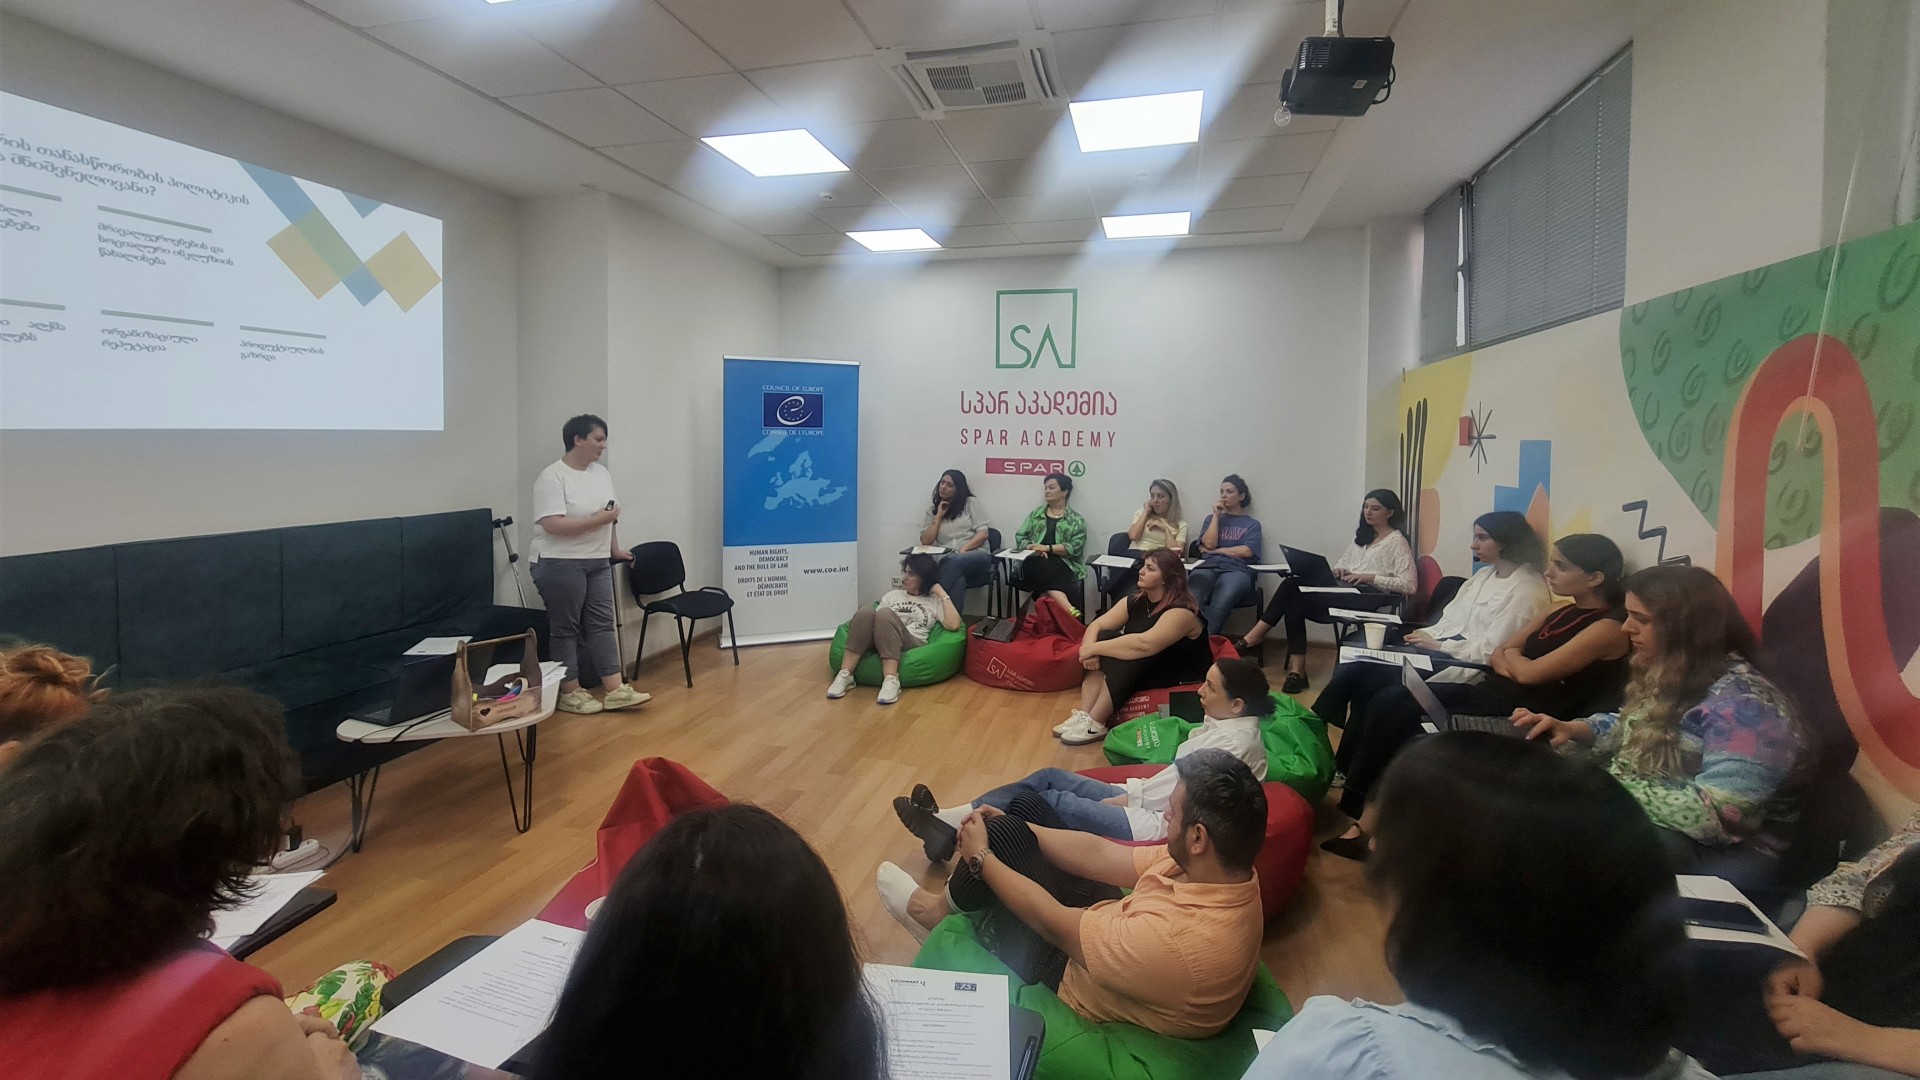 Promoting diversity and equality at the workplace – Council of Europe collaborates with SPAR Georgia